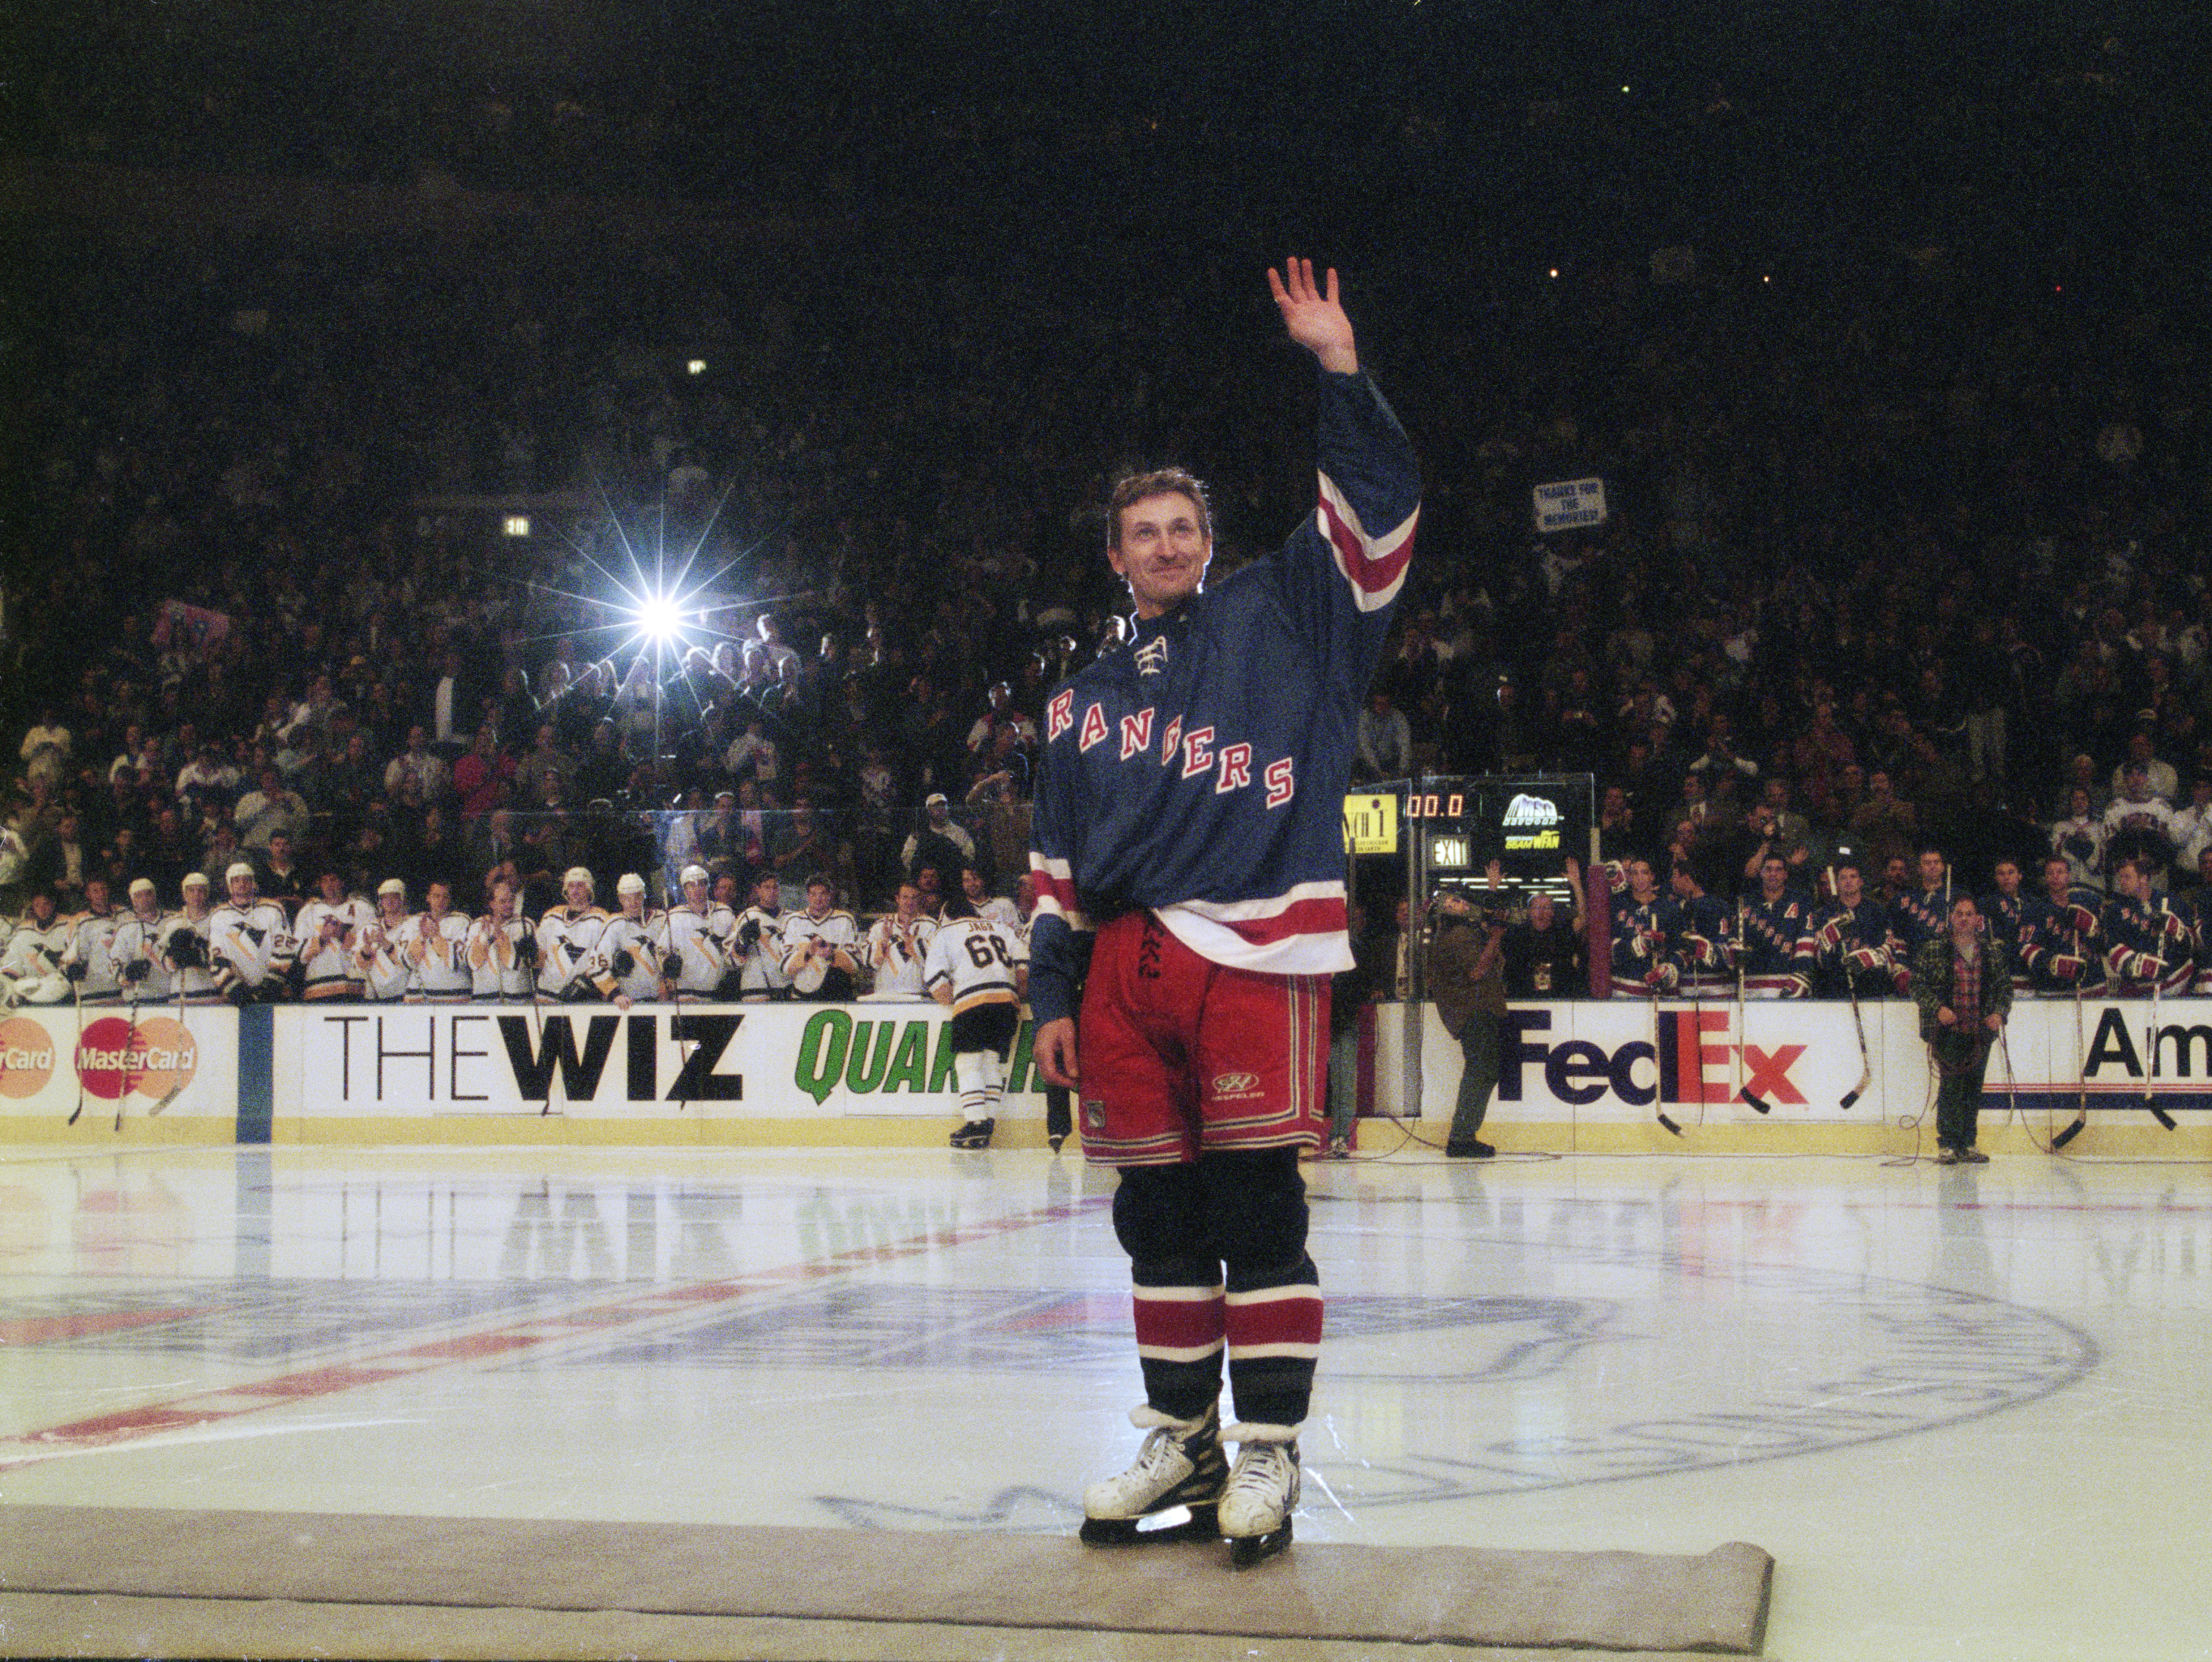 Wayne Gretzky The greatest to ever play the game